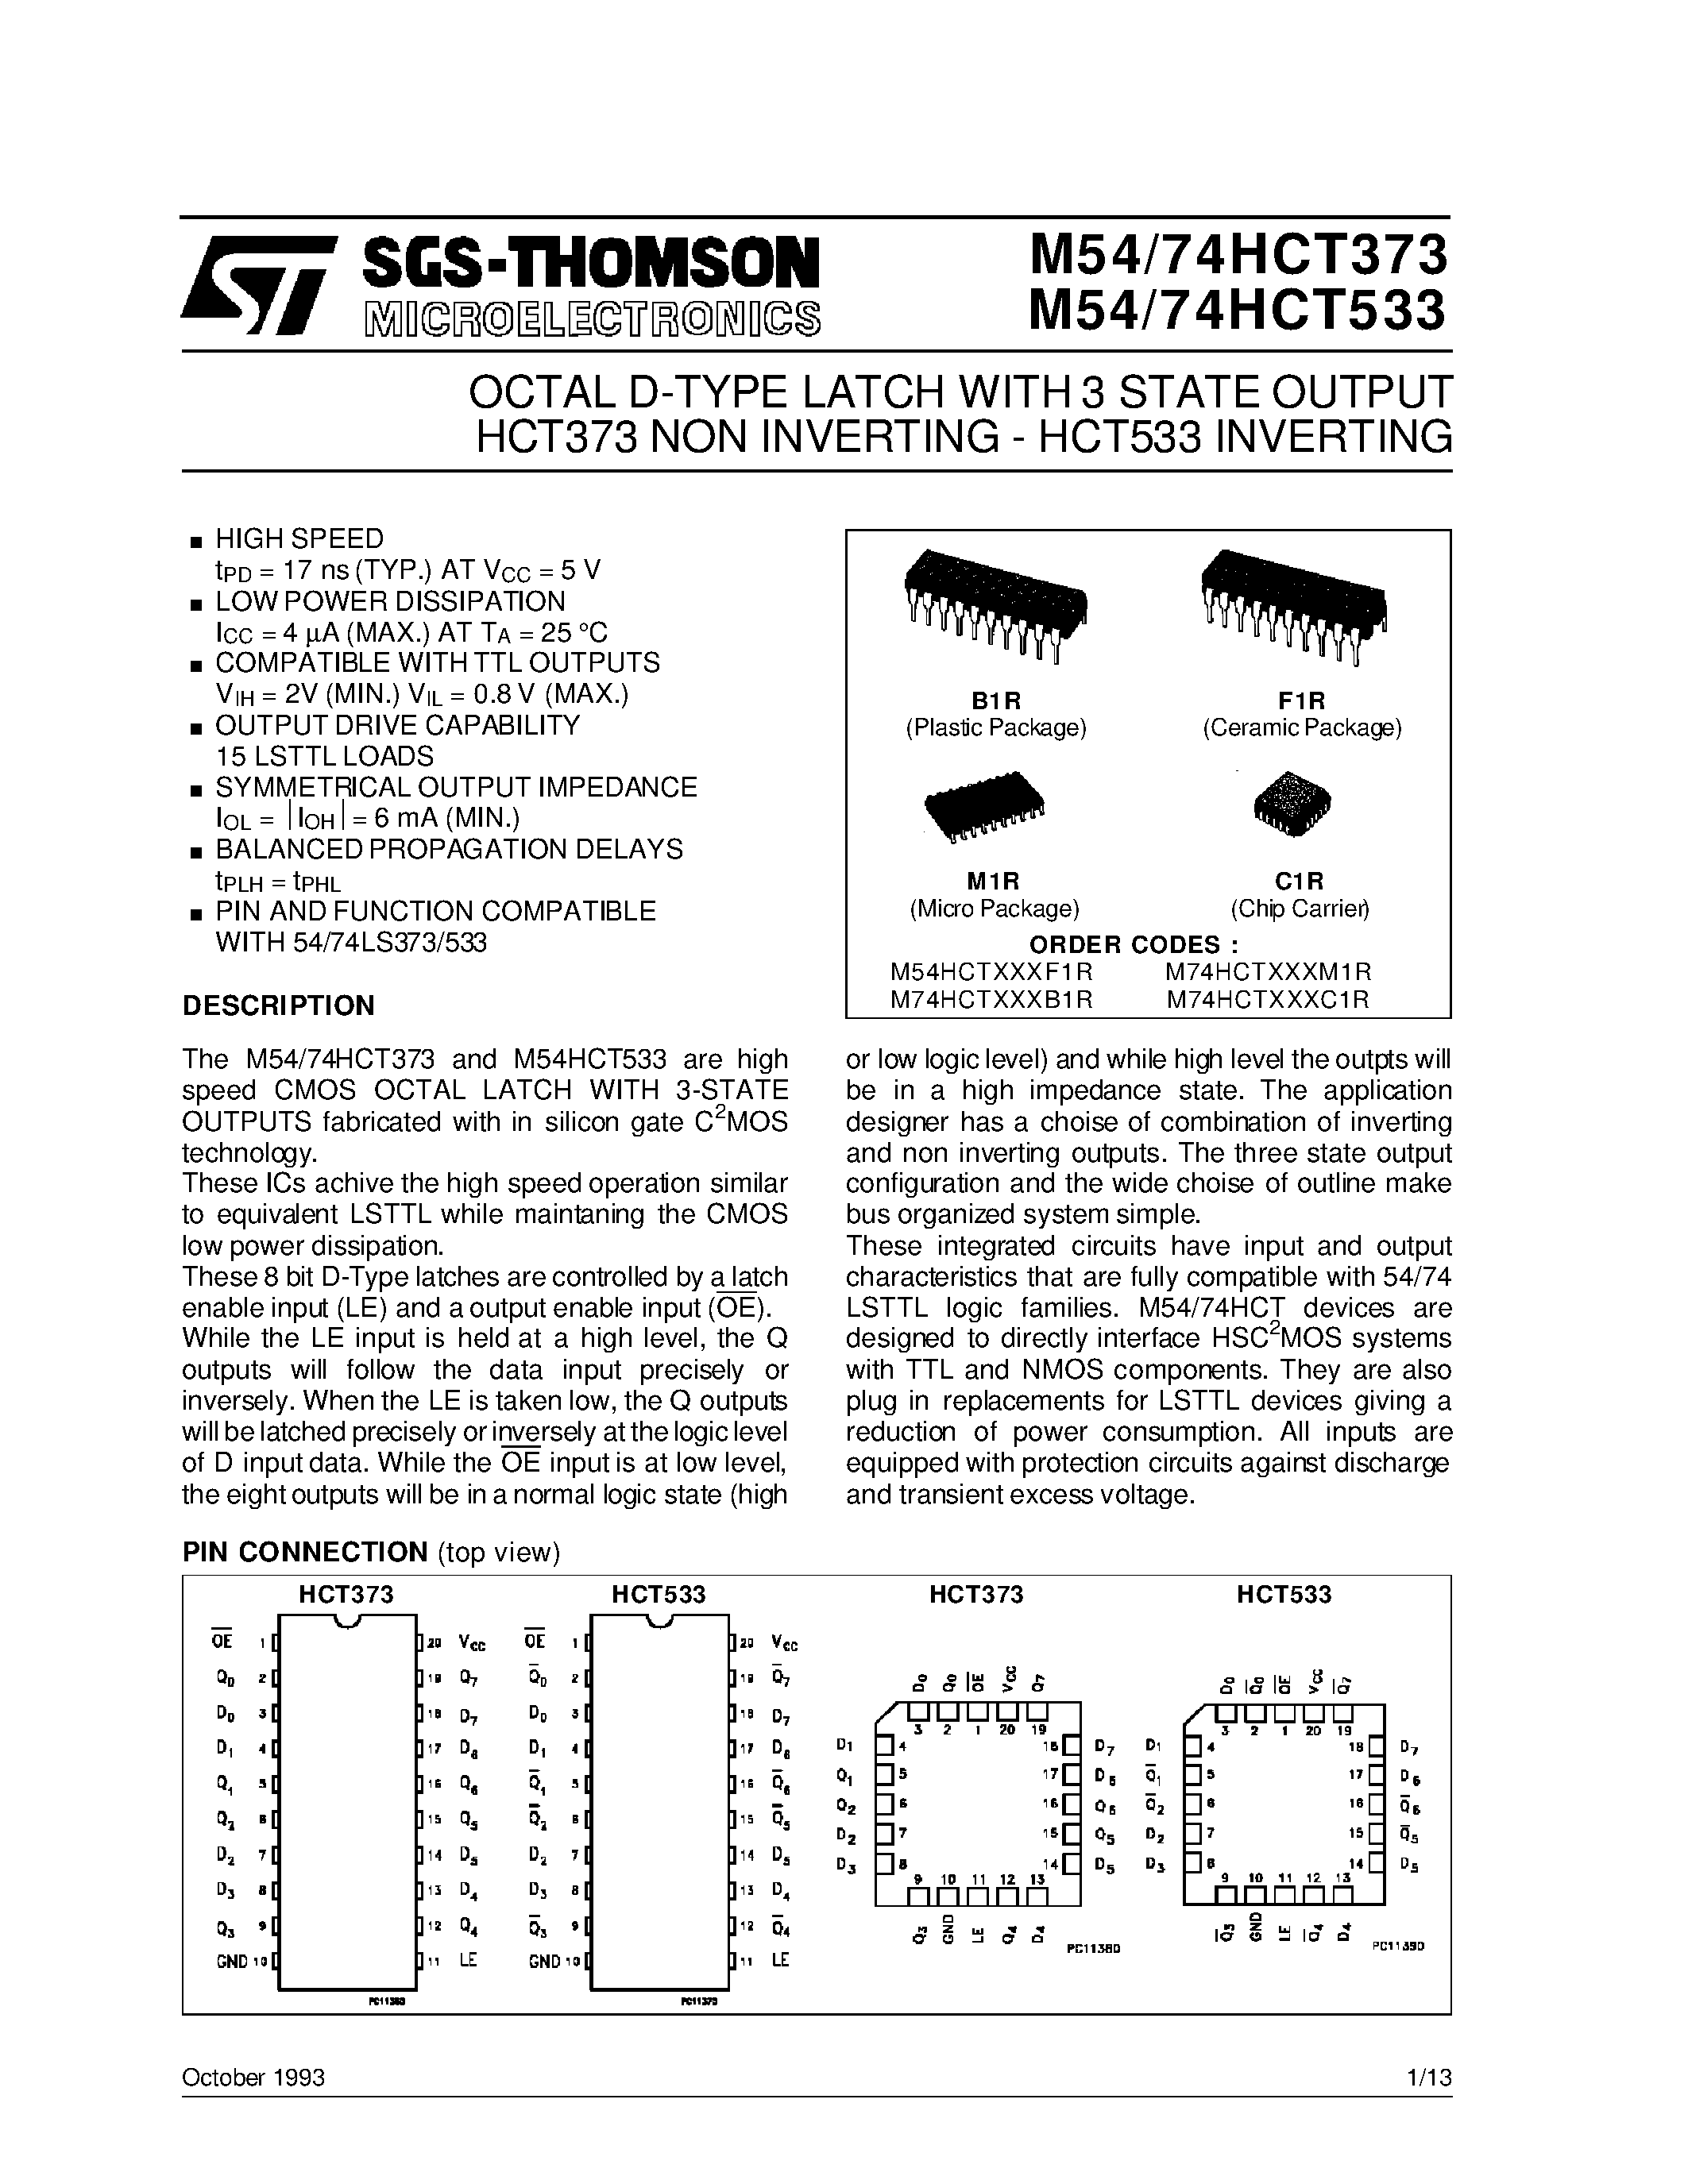 Datasheet M74HCT533 - OCTAL D-TYPE LATCH WITH 3 STATE OUTPUT HCT373 NON INVERTING - HCT533 INVERTING page 1